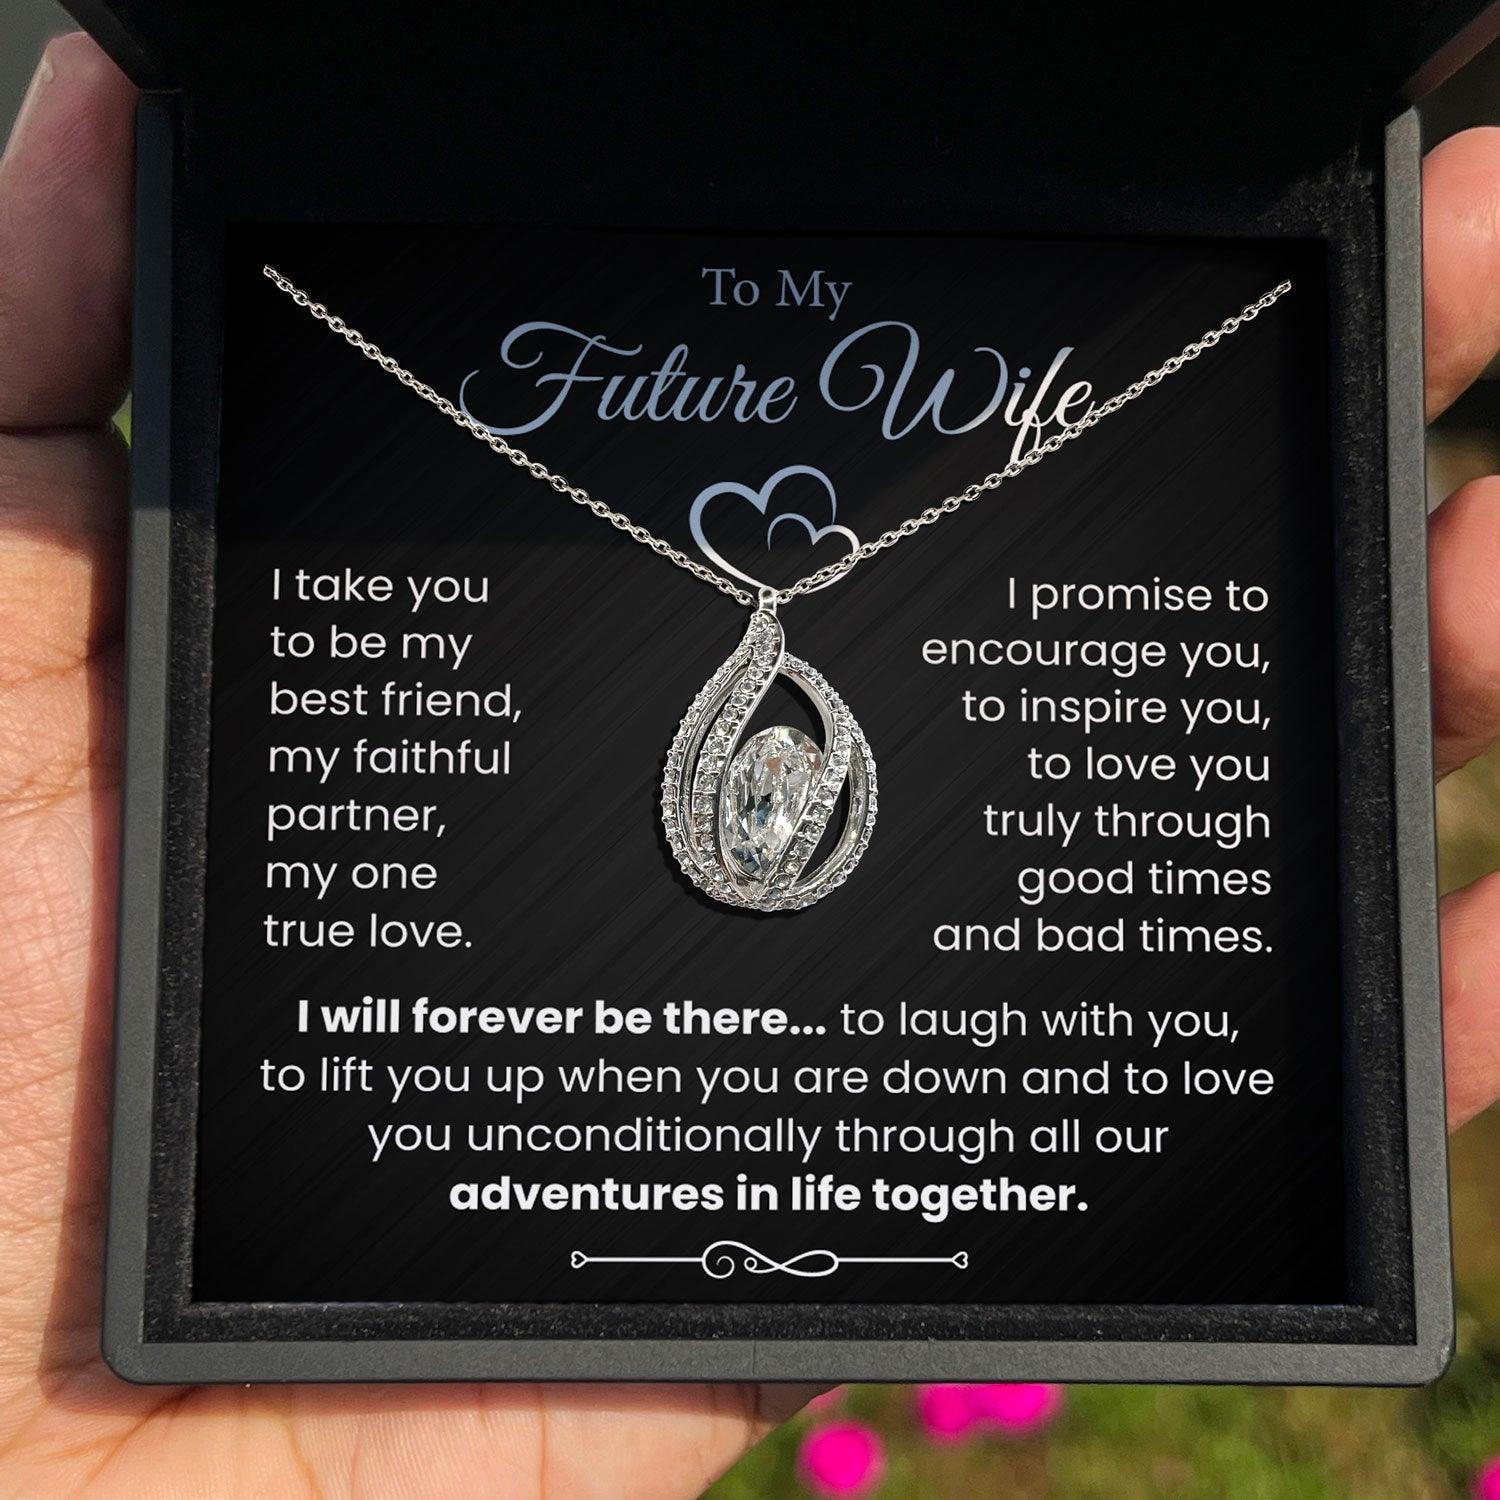 To My Future Wife - I Will Forever Be There To Laugh With You - Orbital Birdcage Necklace - TRYNDI